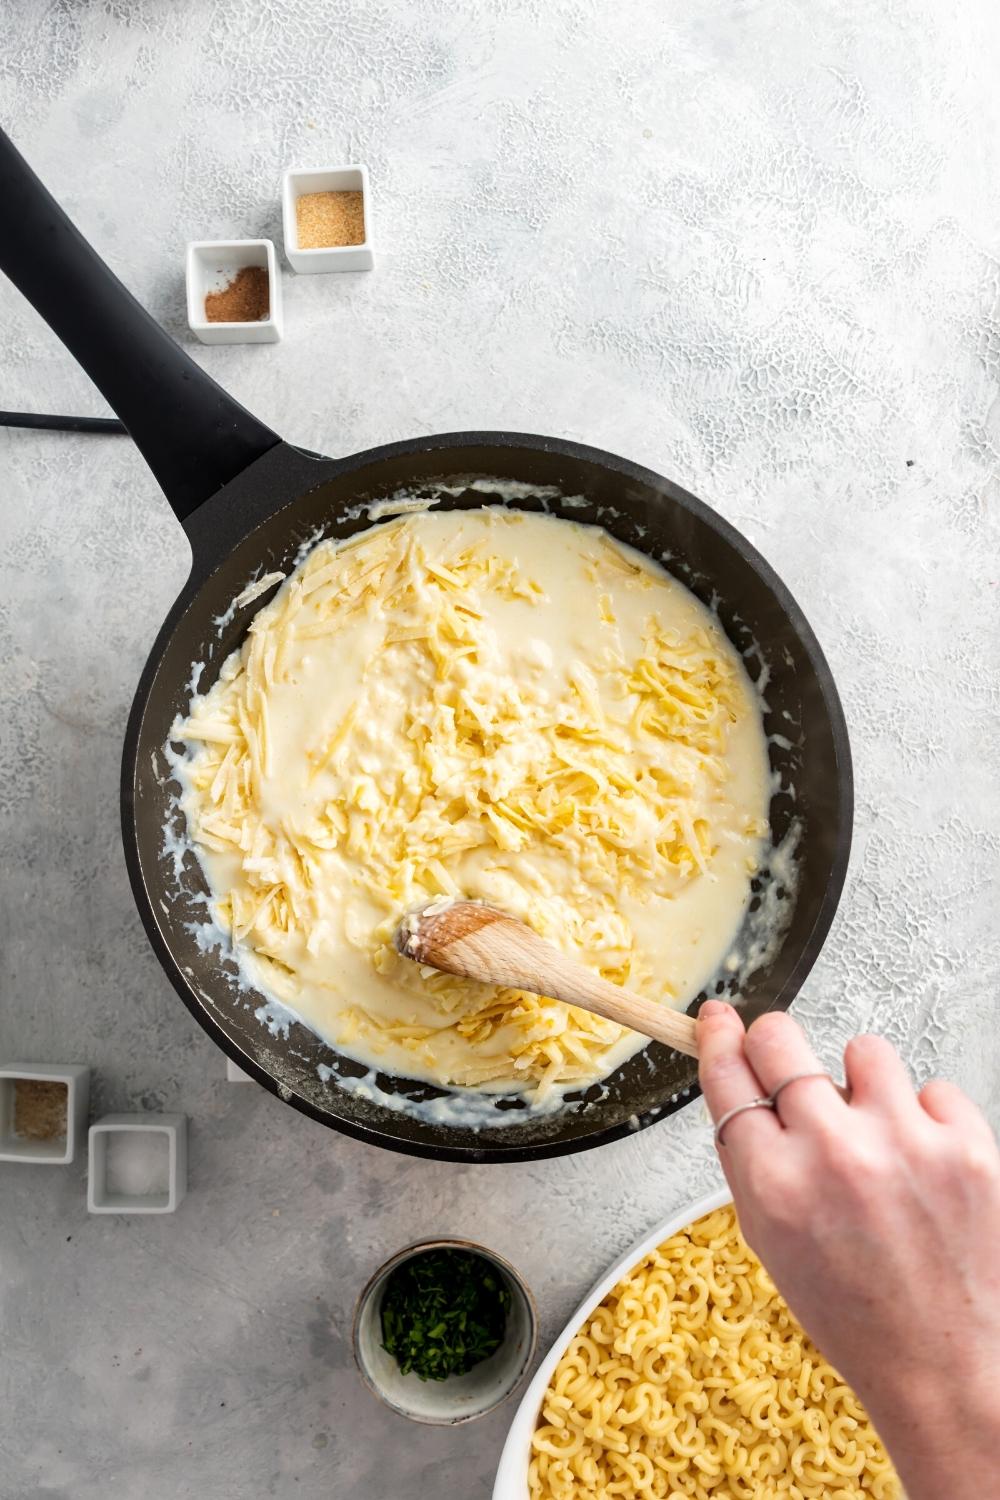 A hand holding a wooden spoon stirring around shredded cheese and sauce and a black skillet. In front of it is part of a white bowl that is filled with elbow macaroni noodles.